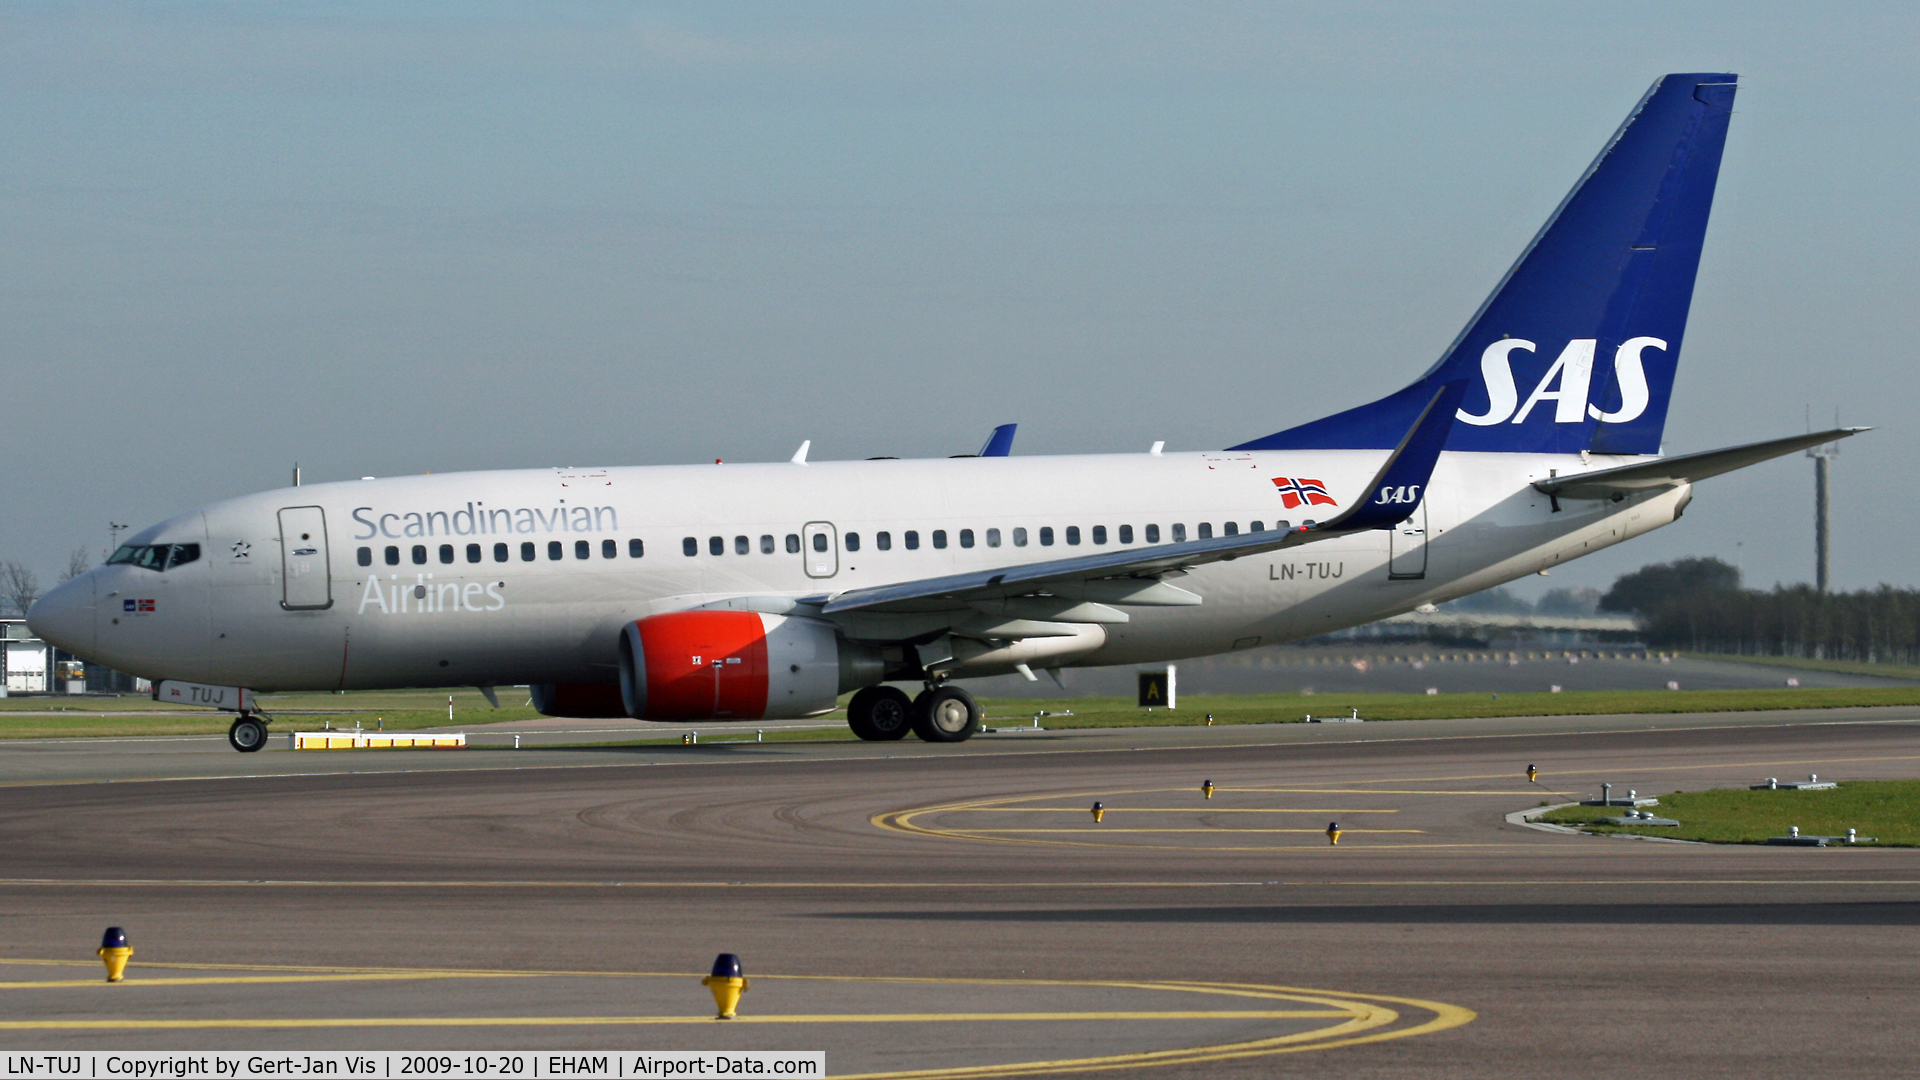 LN-TUJ, 2001 Boeing 737-705 C/N 29095, Taxiing out